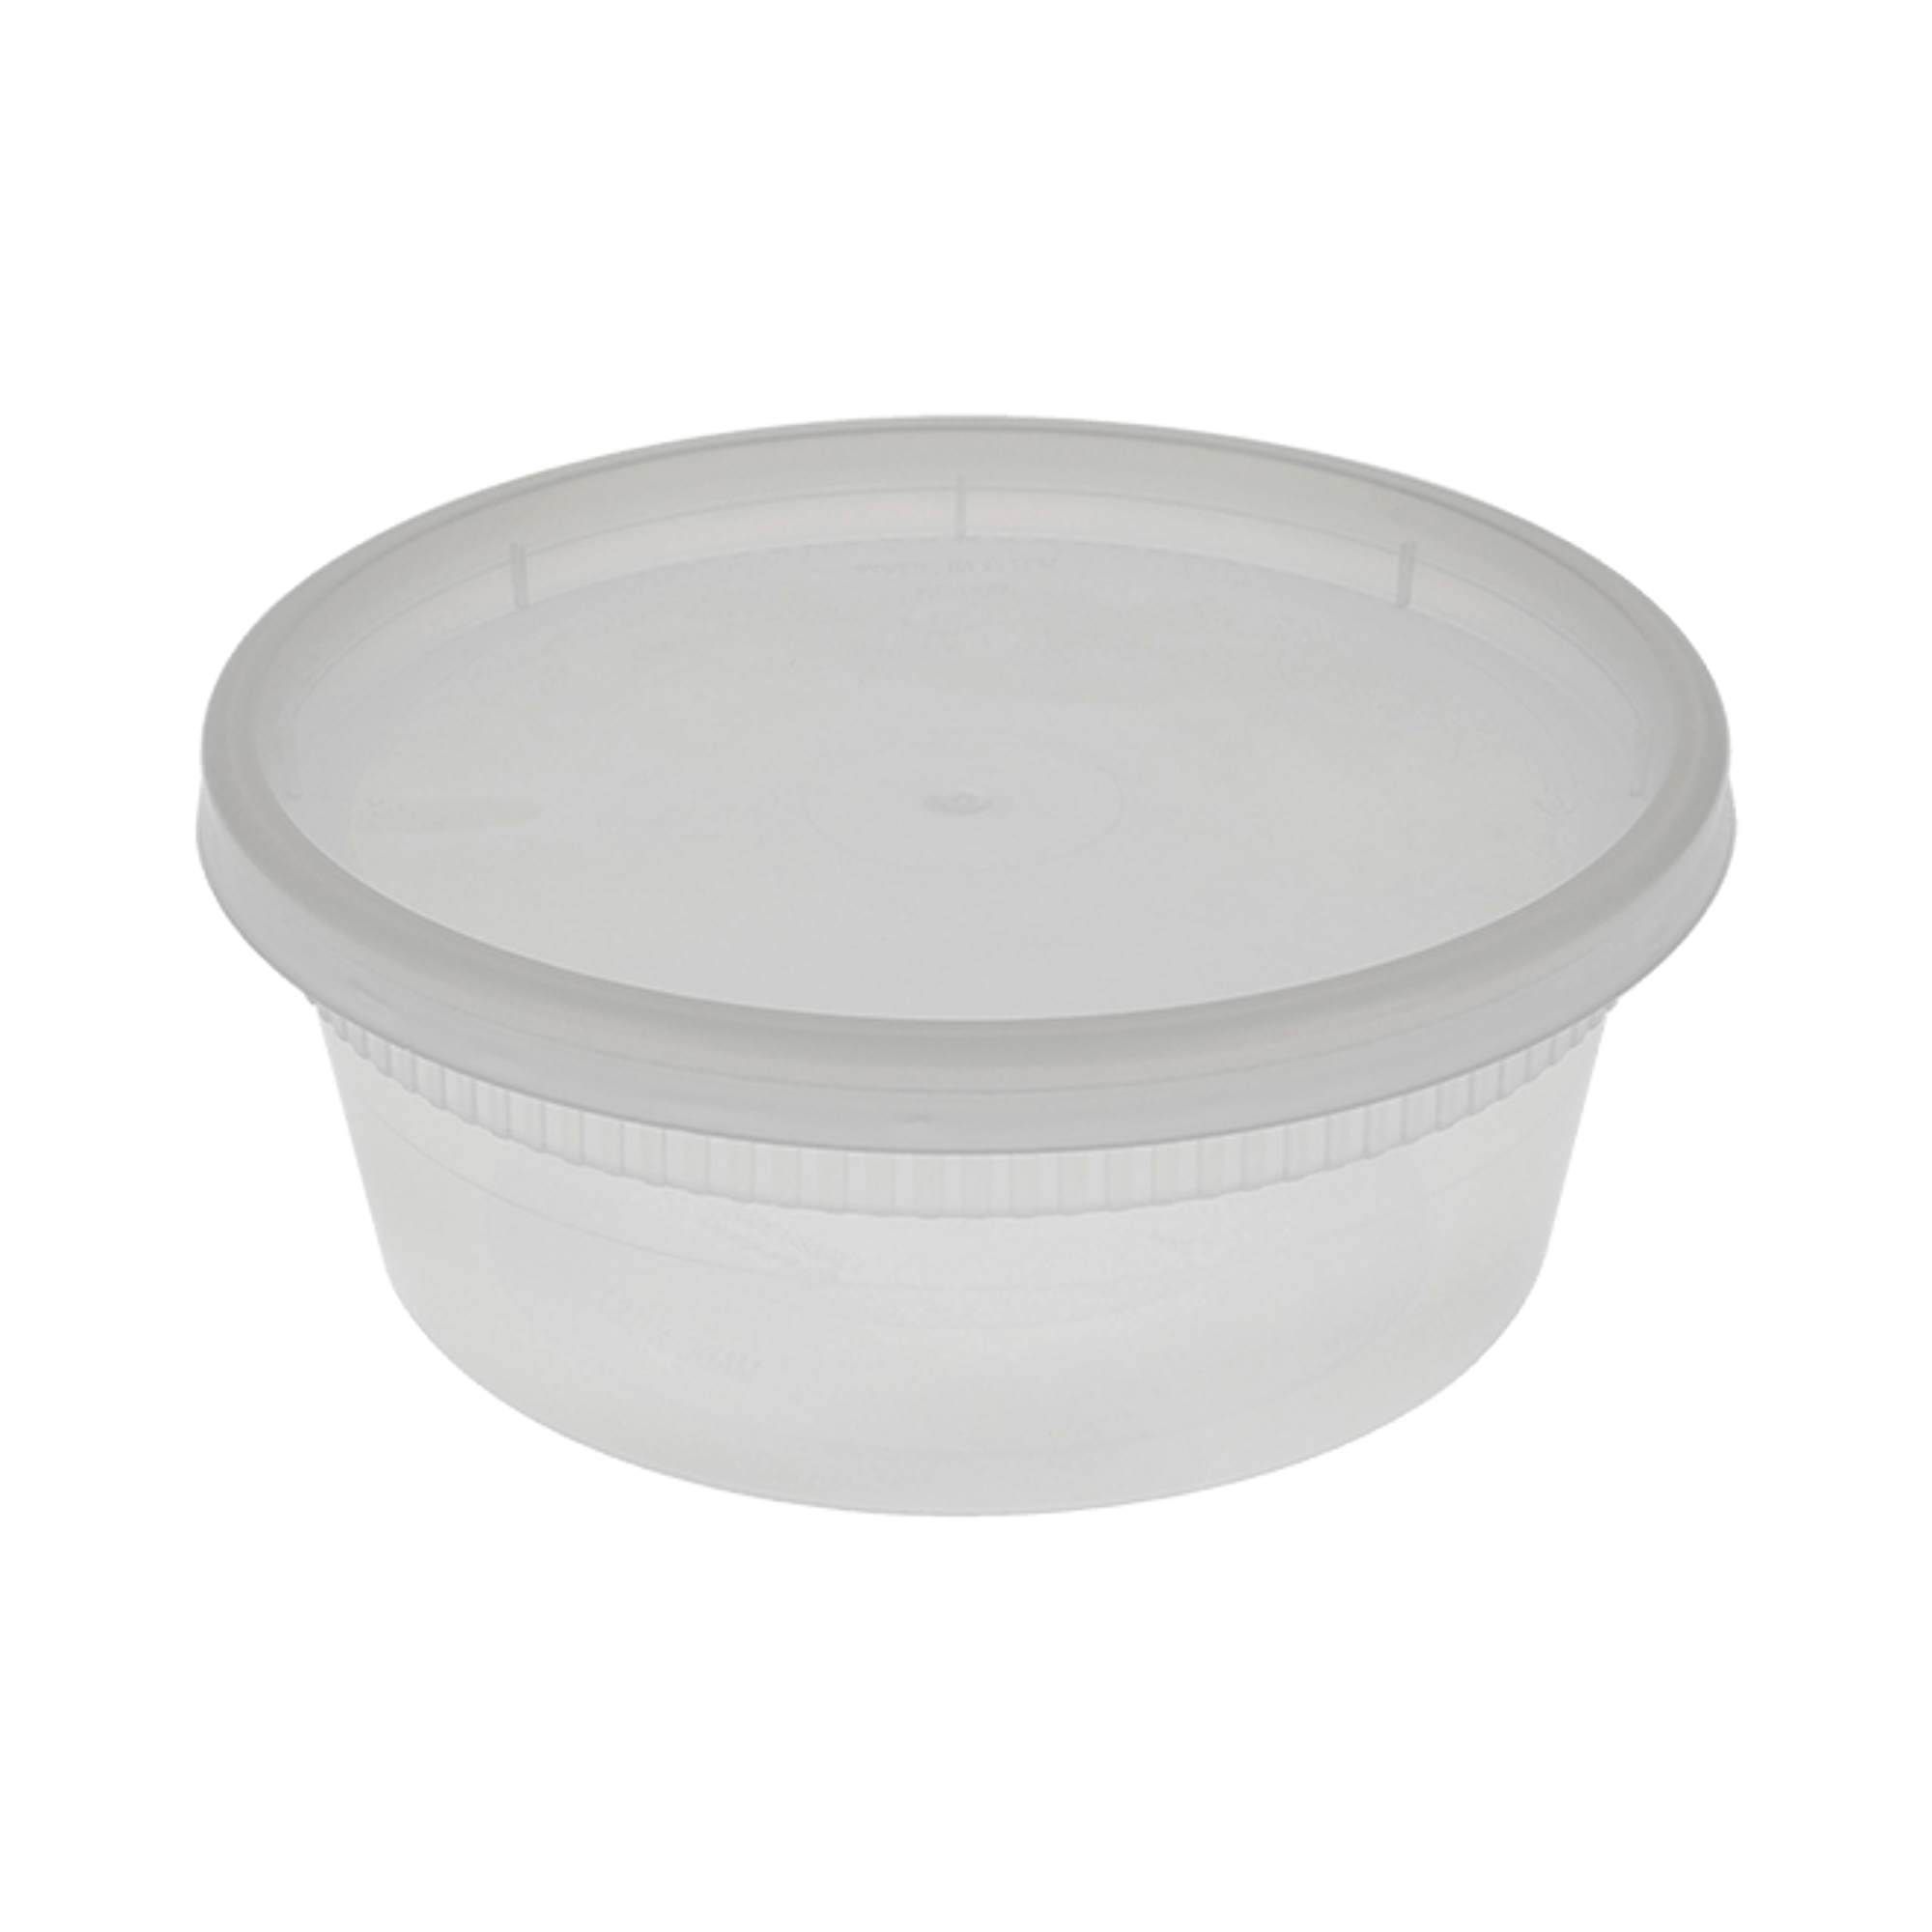 Pactiv YSD2532 32 oz. Plastic Deli Container with Lid - 240/Case